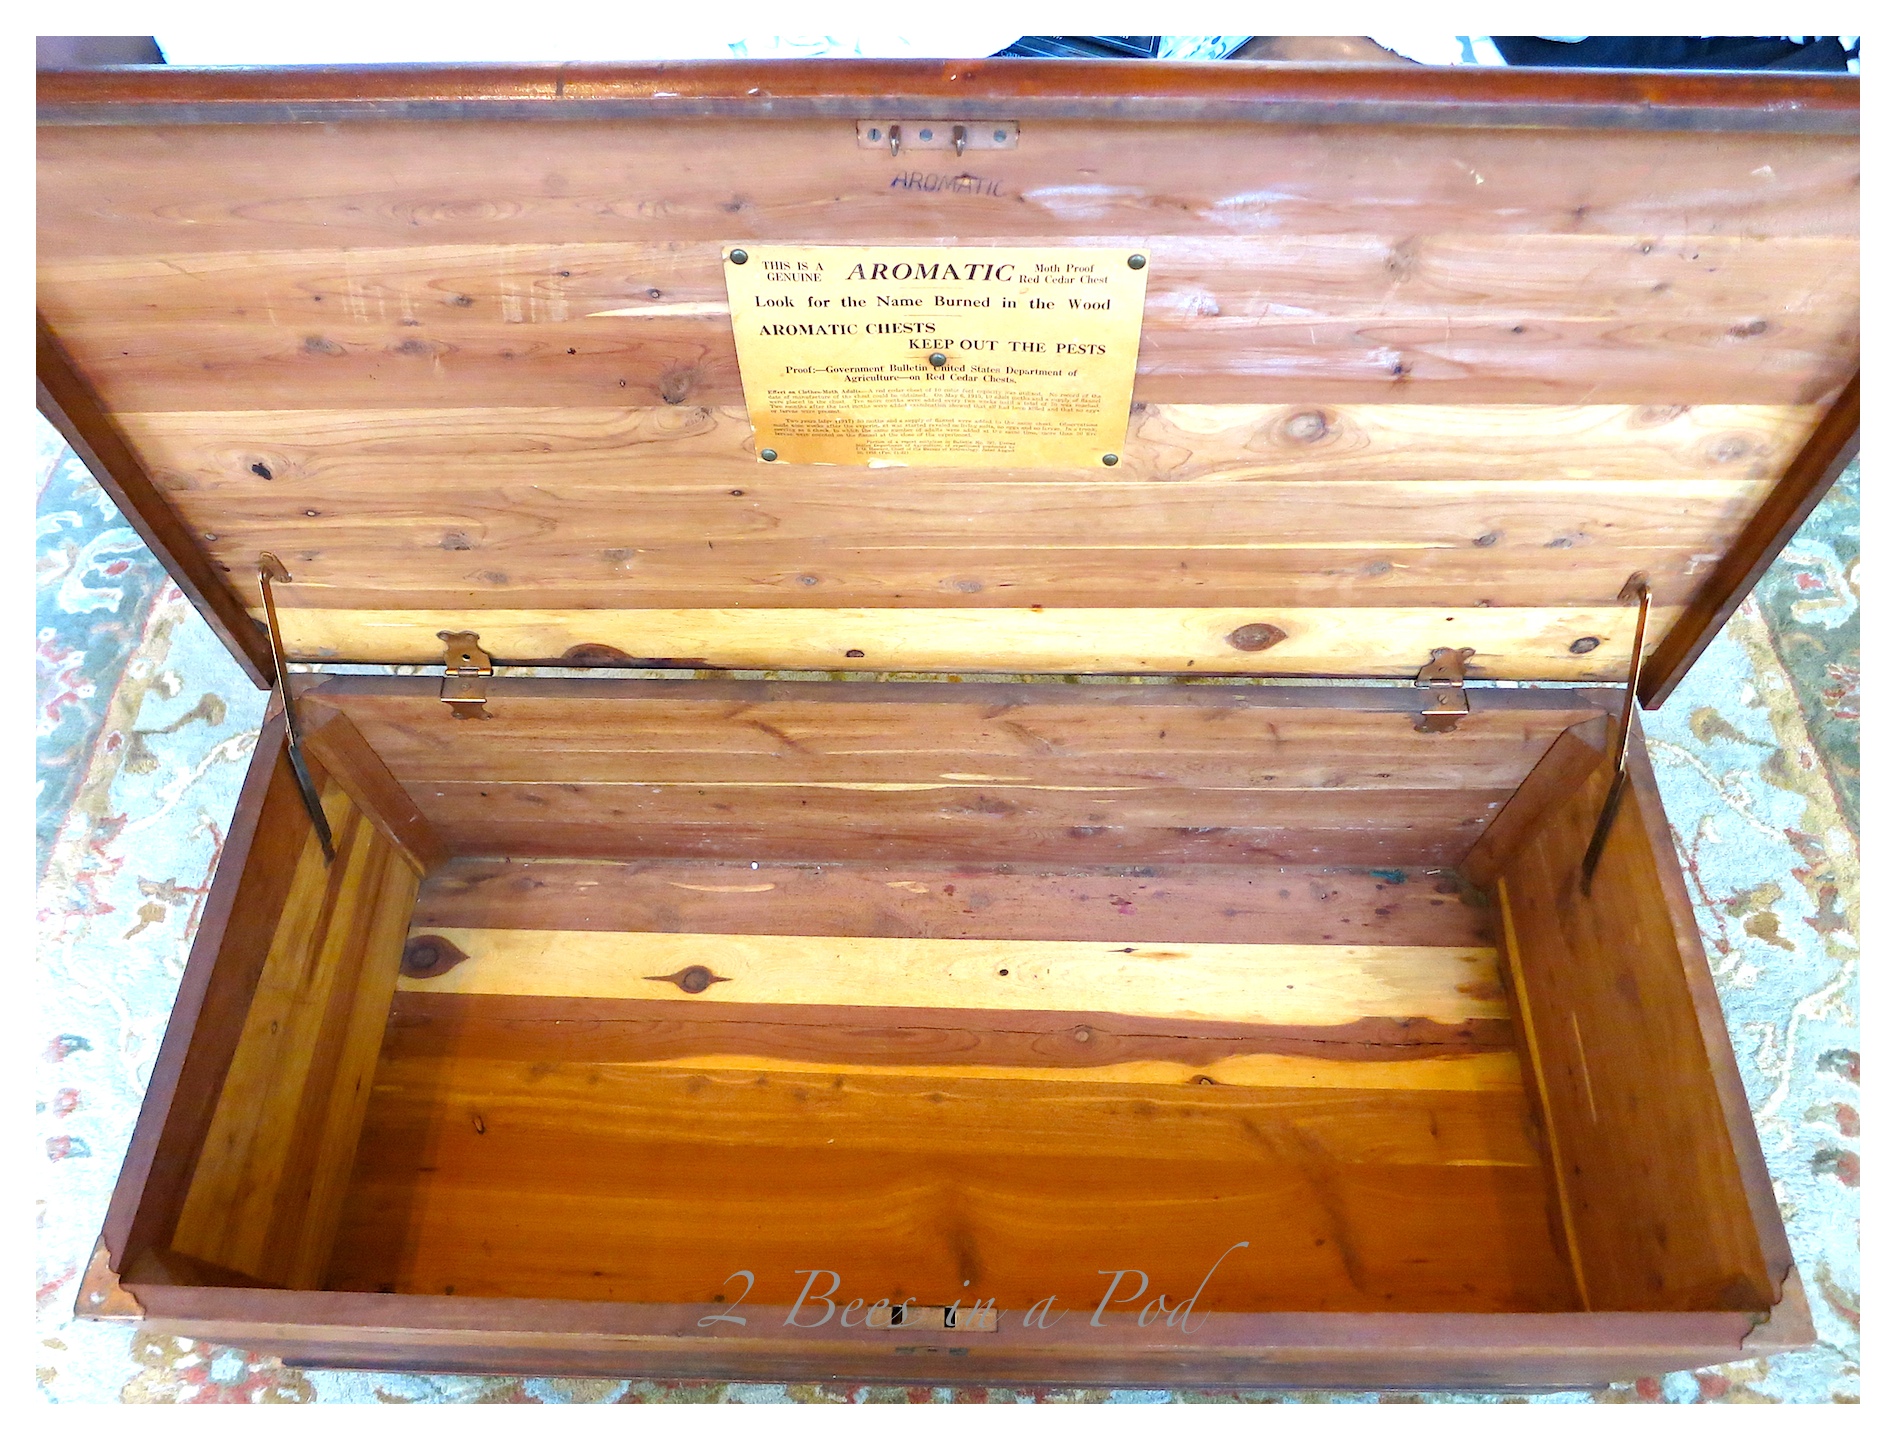 Reviving an antique vintage cedar hope chest using Old English scratch cover. Really nourishes the old wood and brings back the natural luster.